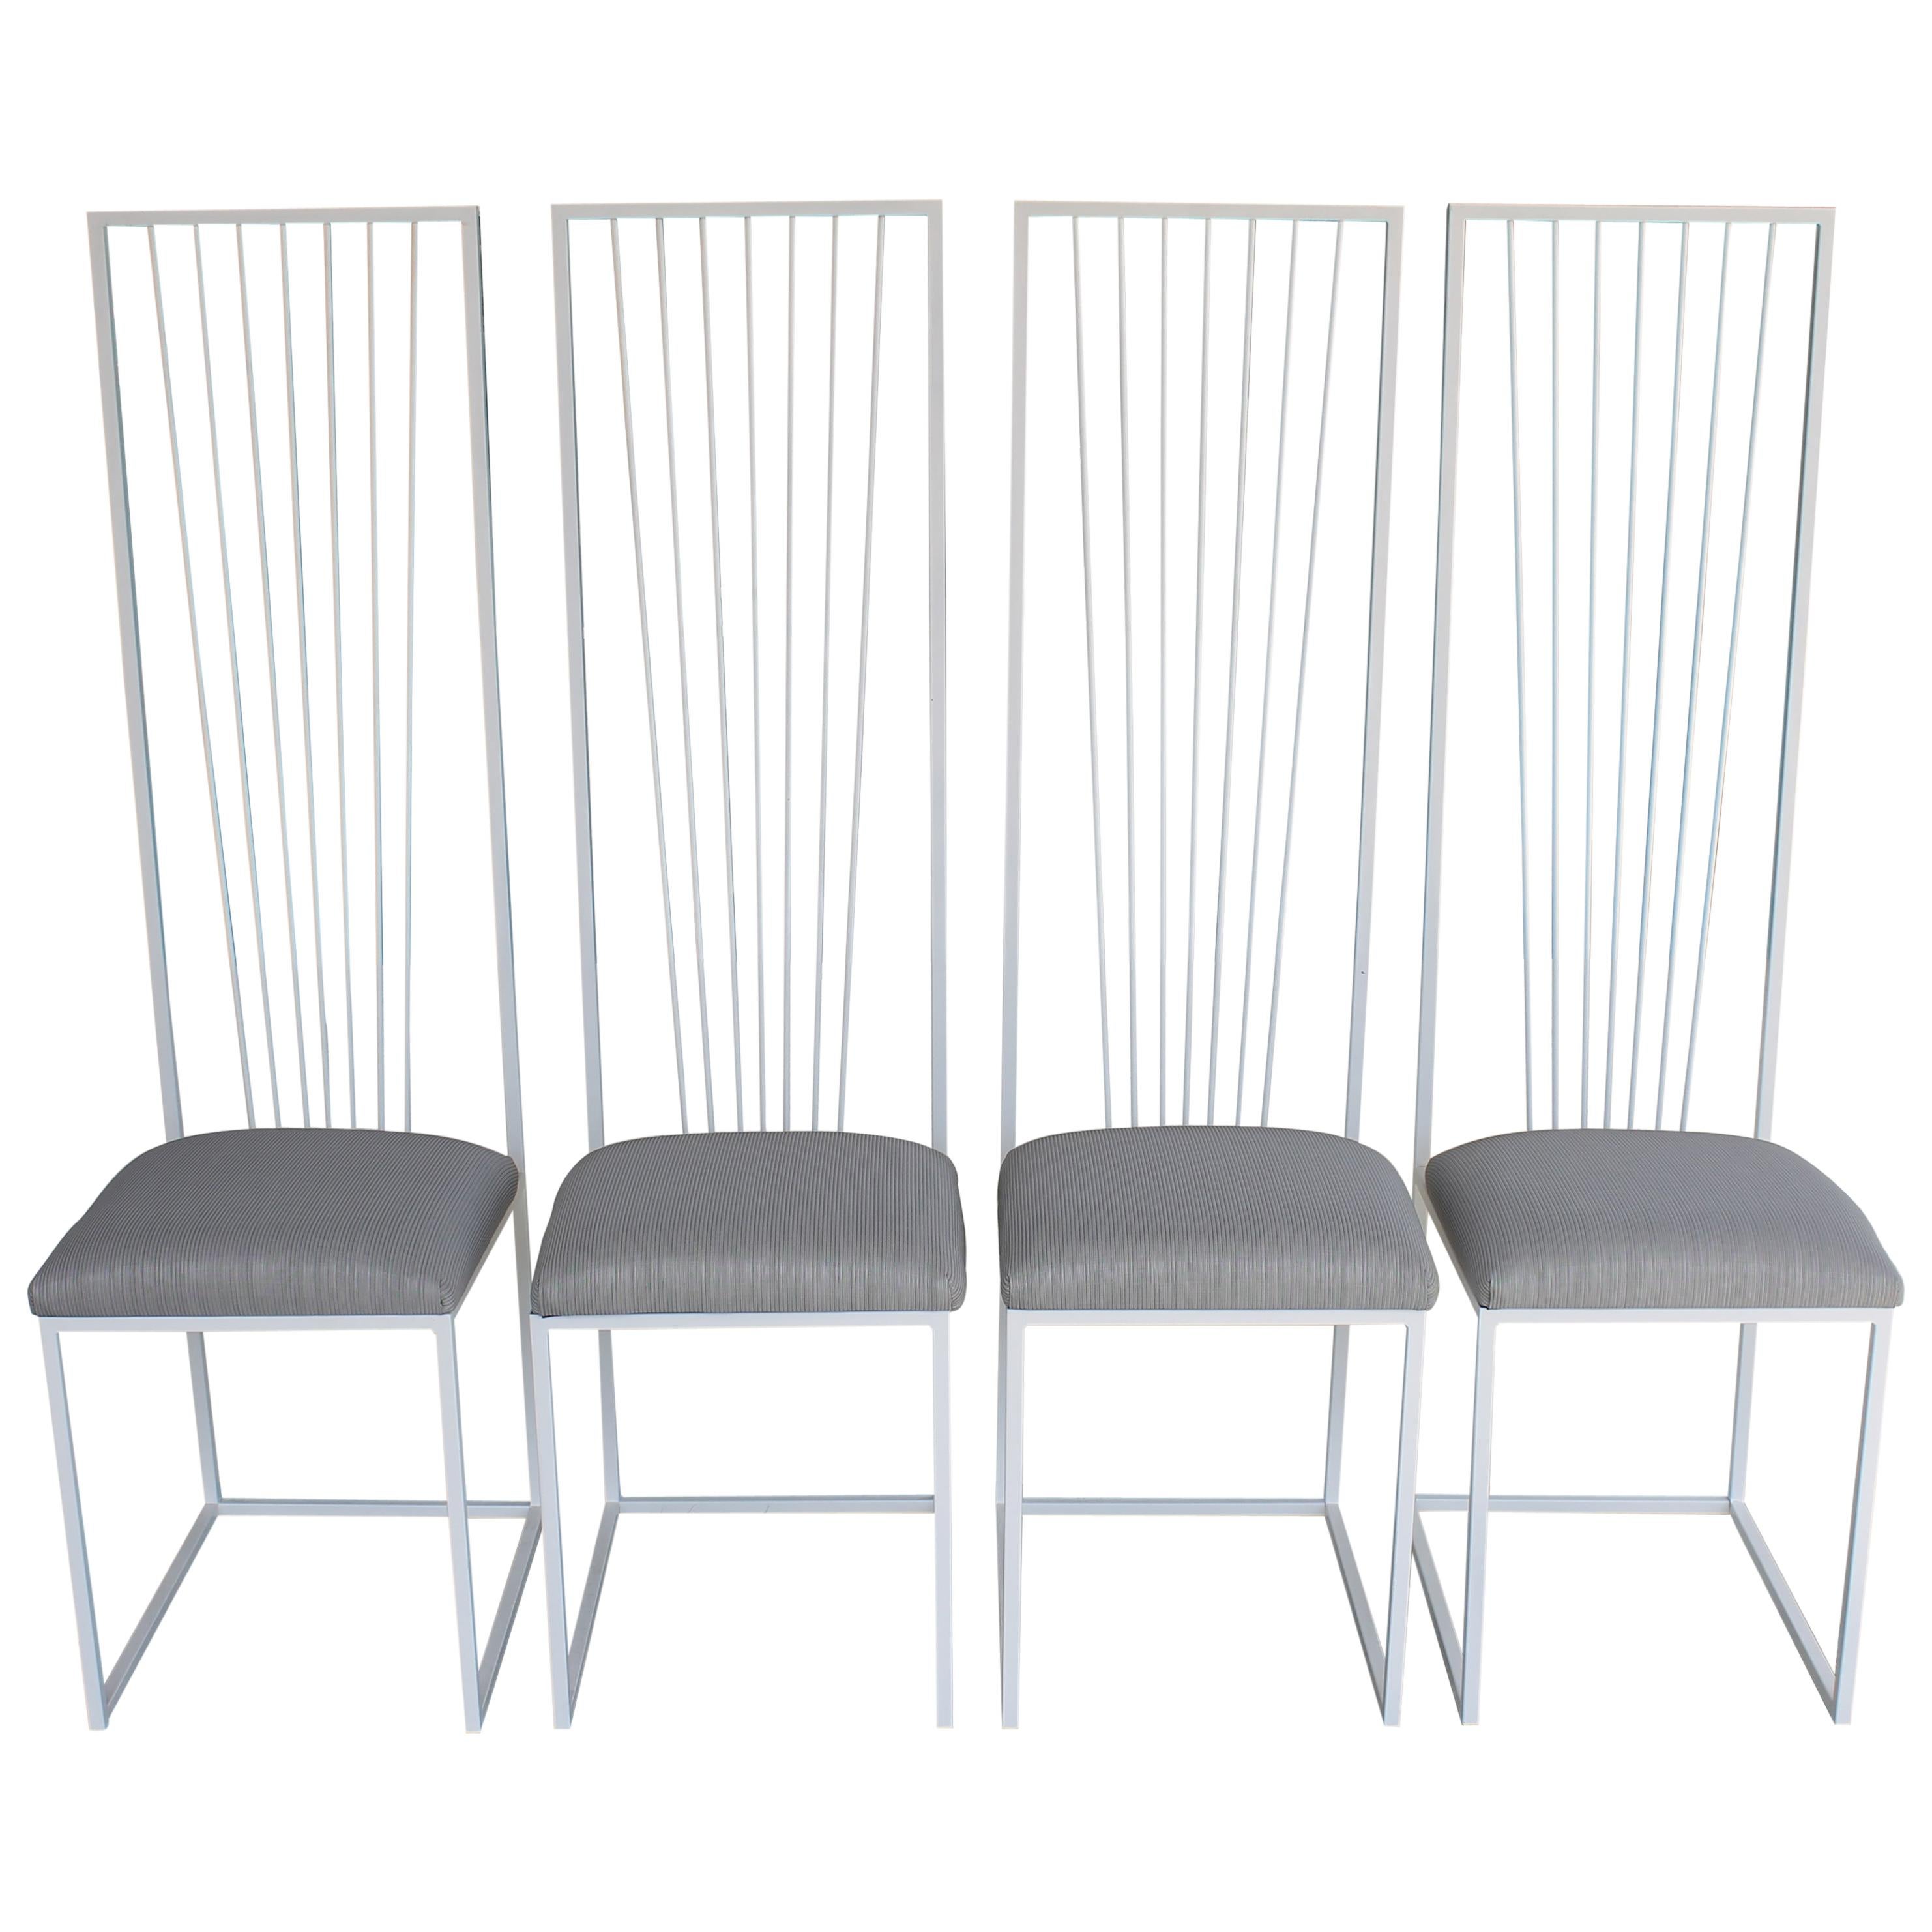 Four Sculptural High-Back Steel Chairs